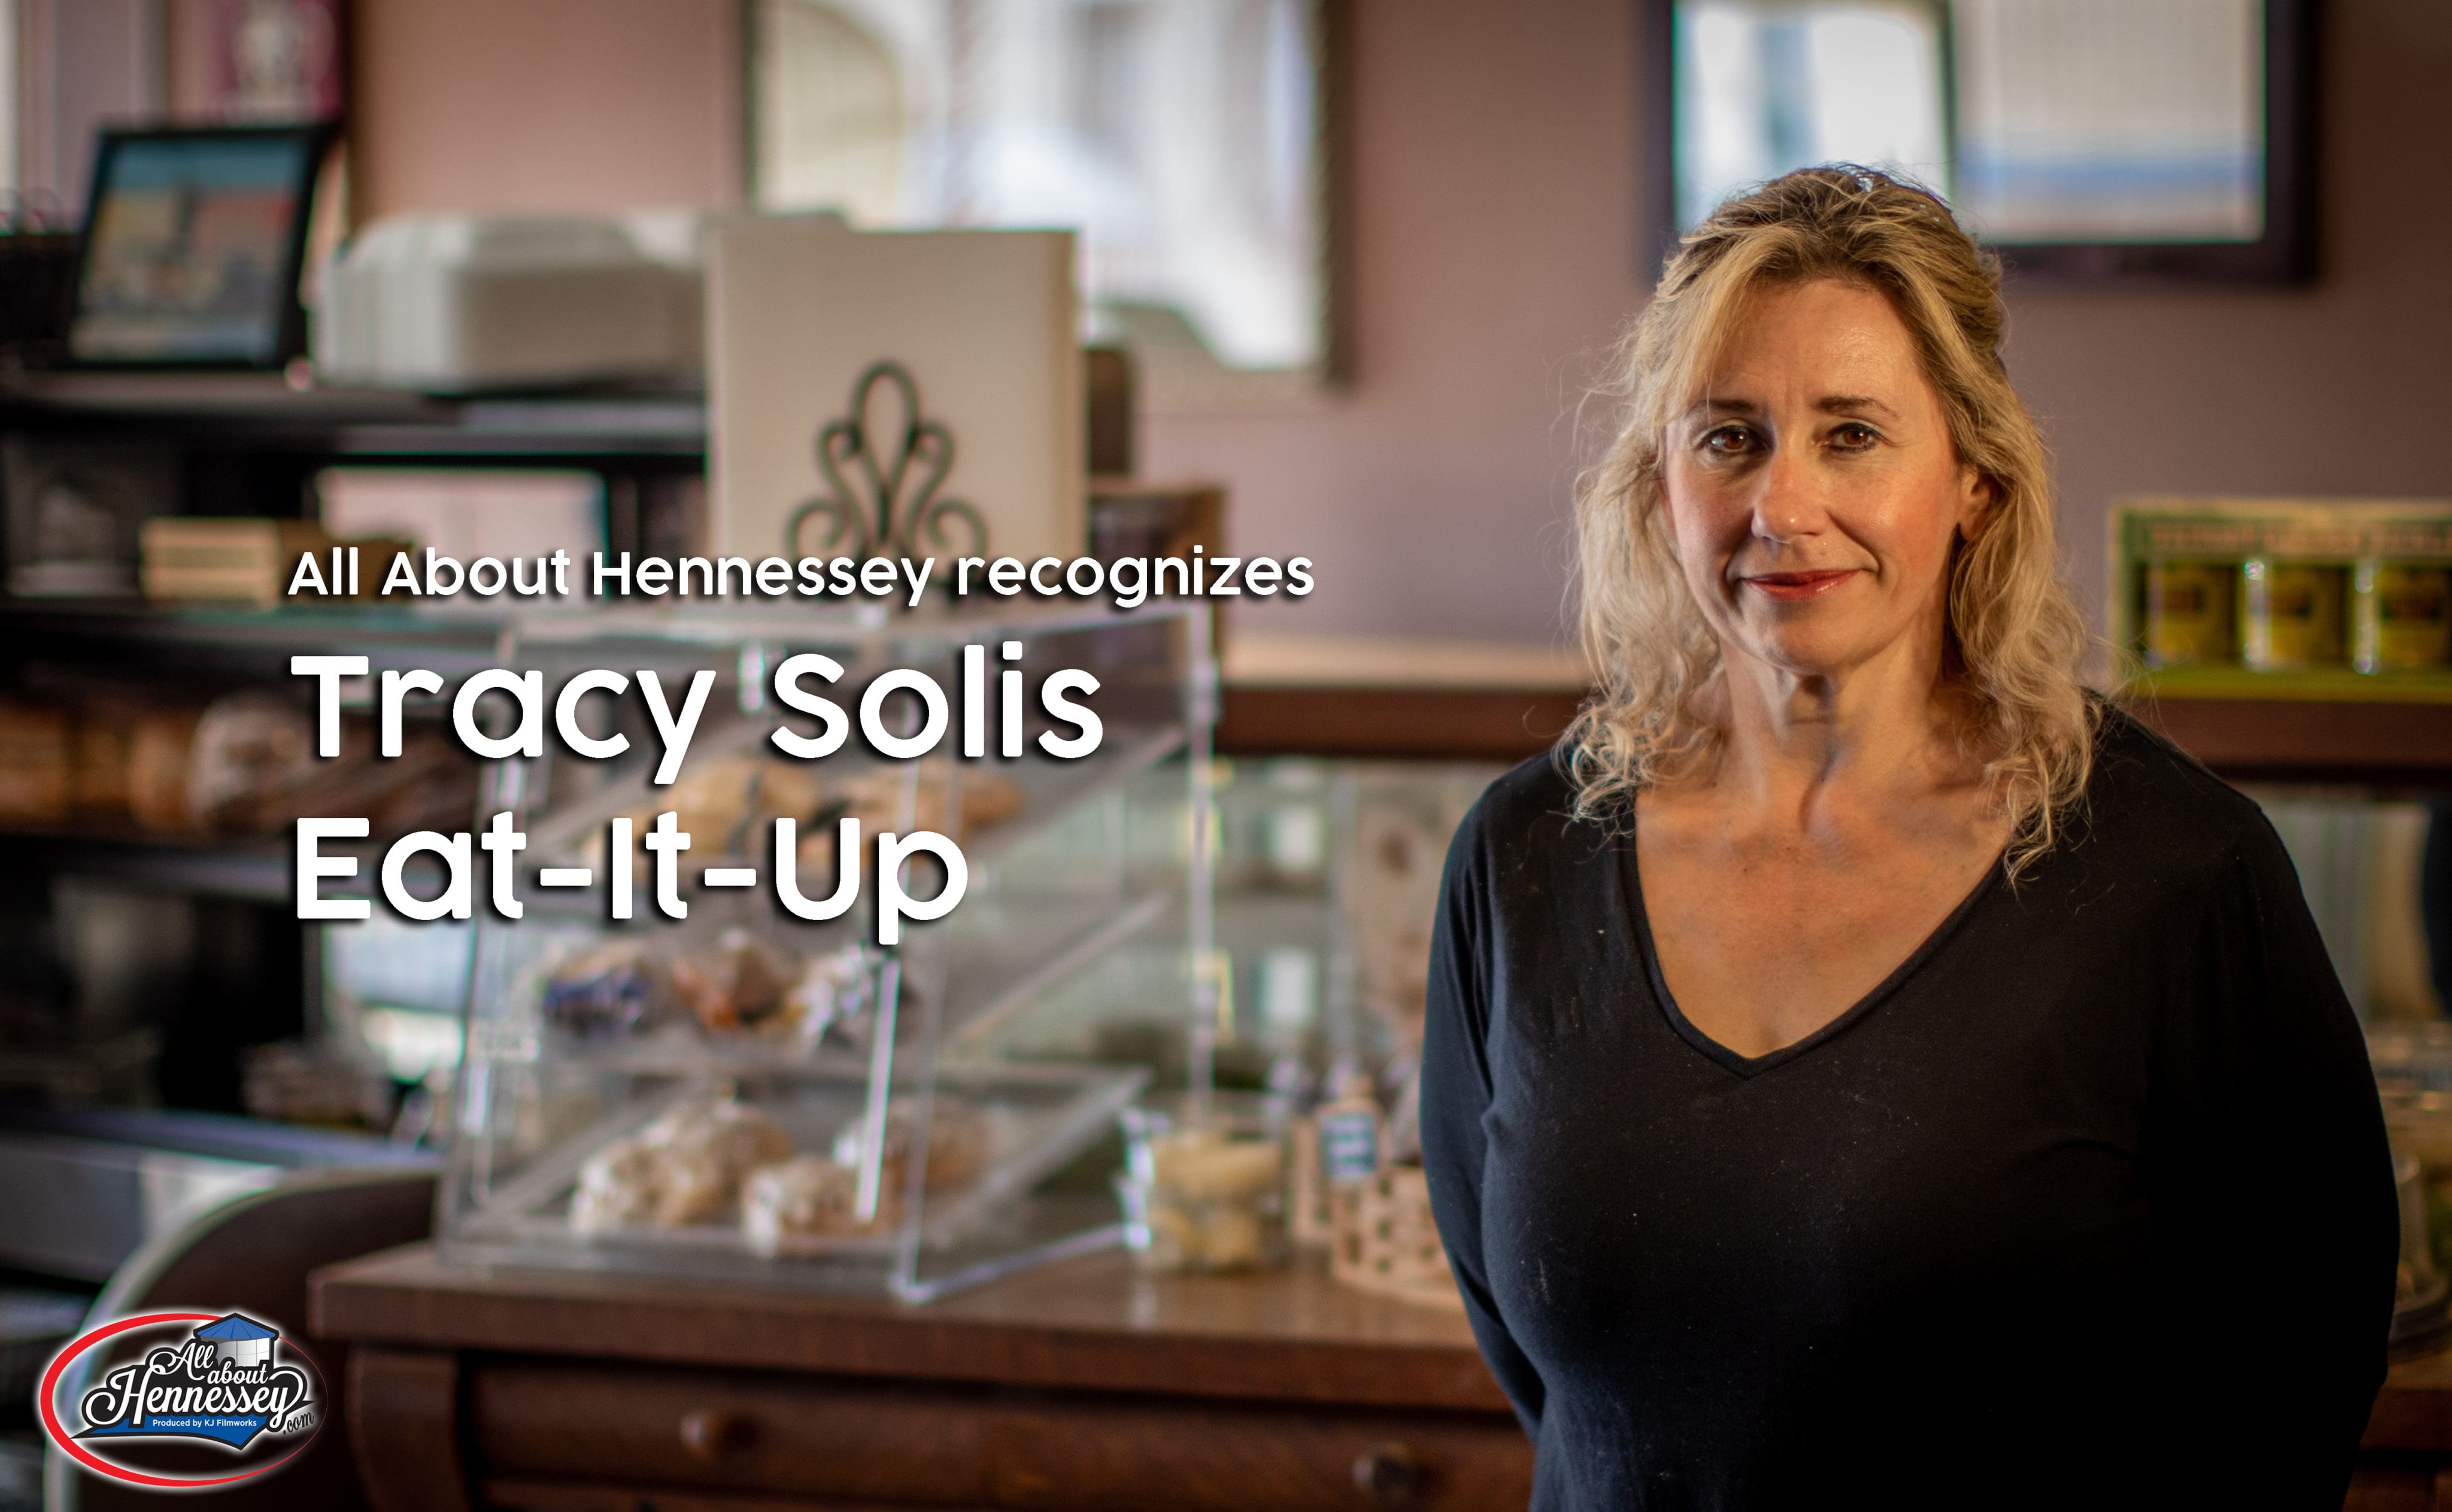 THIS WEEK ALL ABOUT HENNESSEY RECOGNIZES TRACY SOLIS – EAT-IT-UP